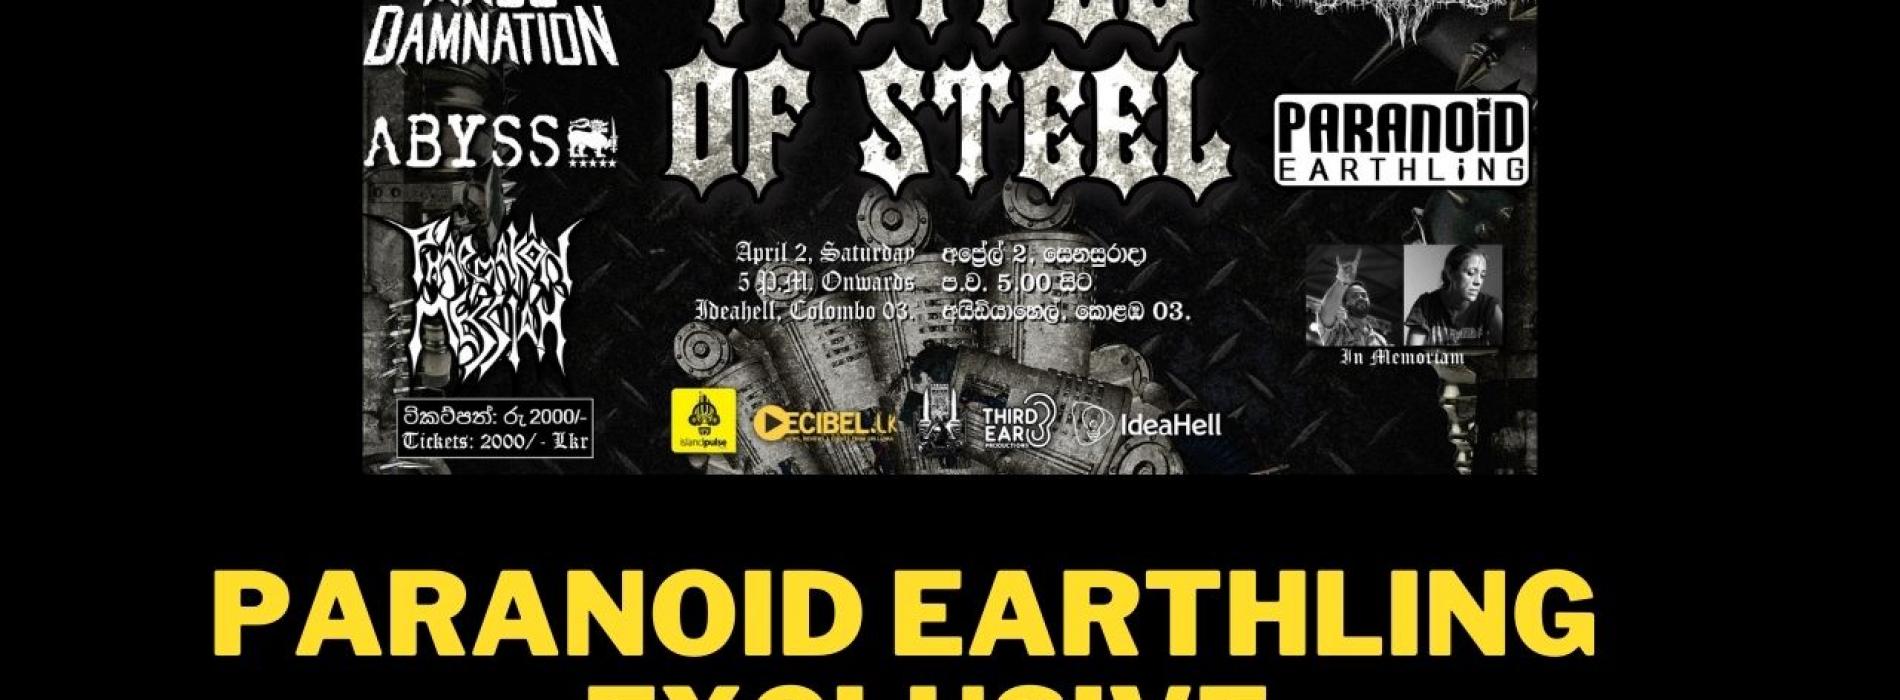 News : Paranoid Earthling Set To Play @ Fistful Of Steel!